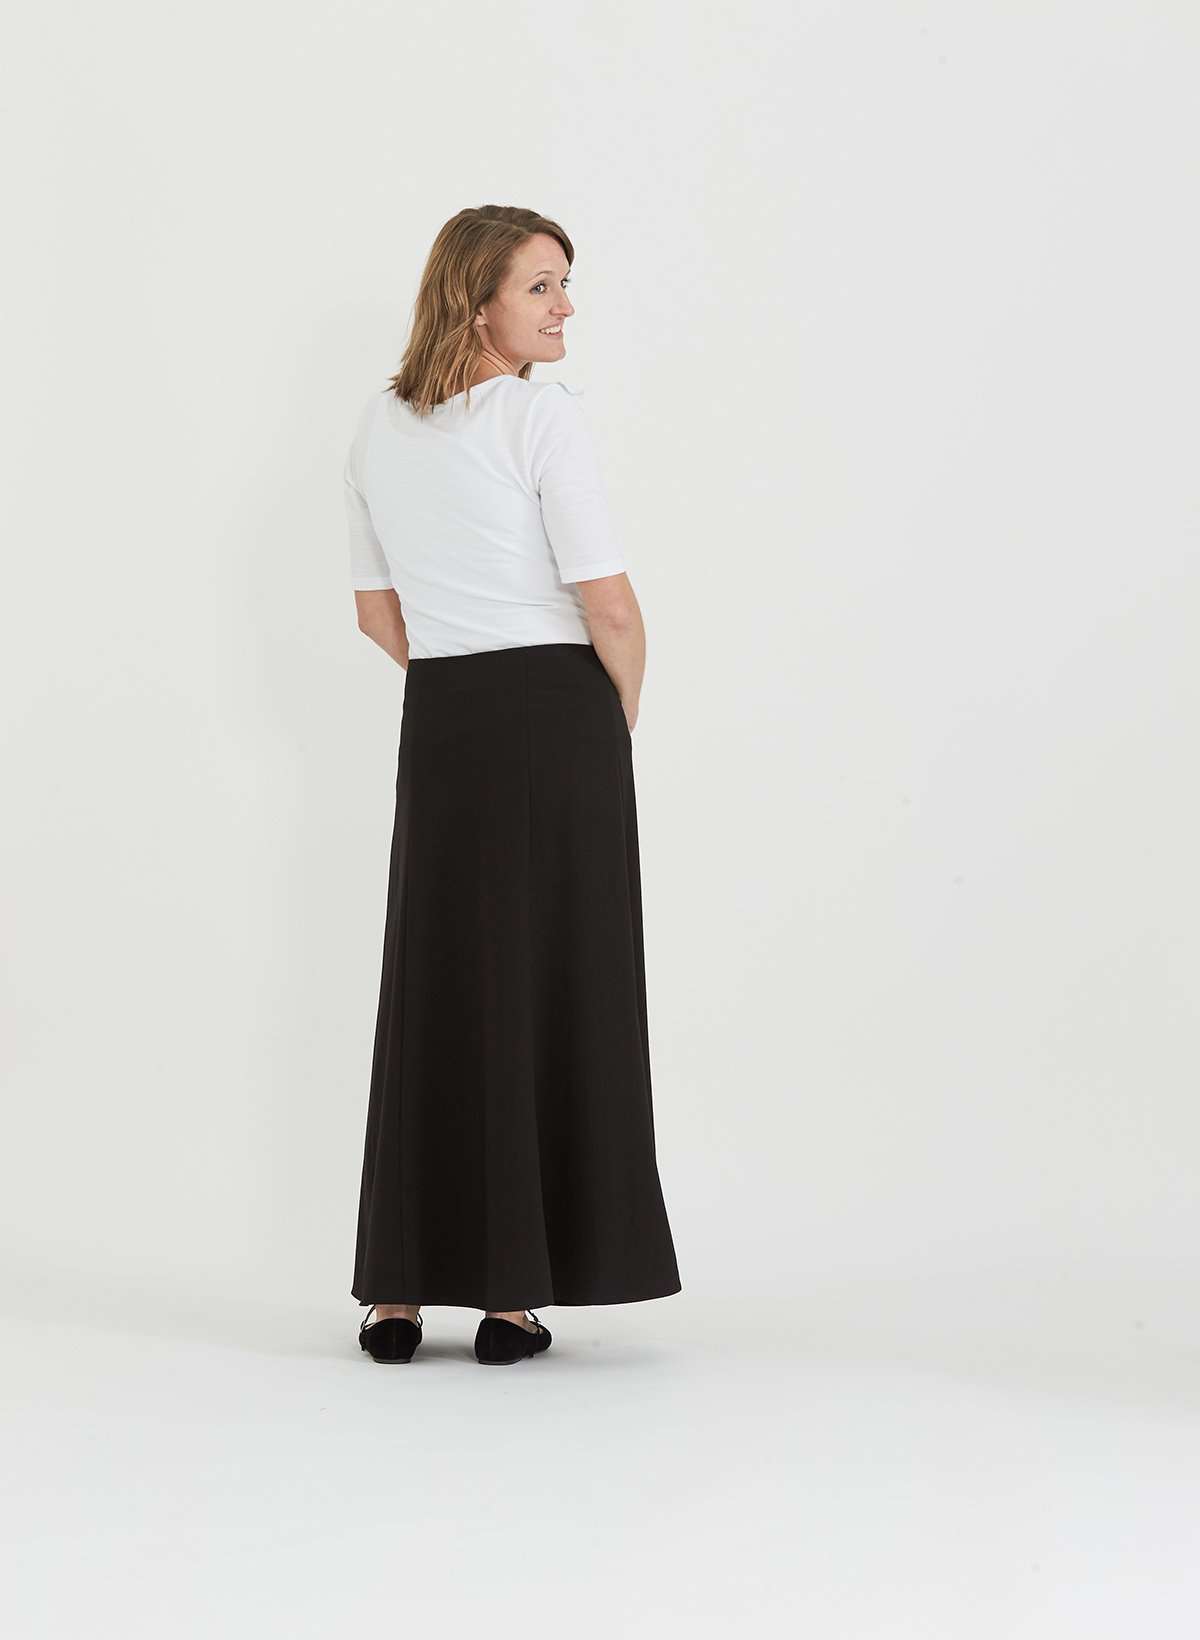 Woman wearing a black, dressy church skirt with panels and a side zipper. This long skirt has panels and a flowy bottom as well.